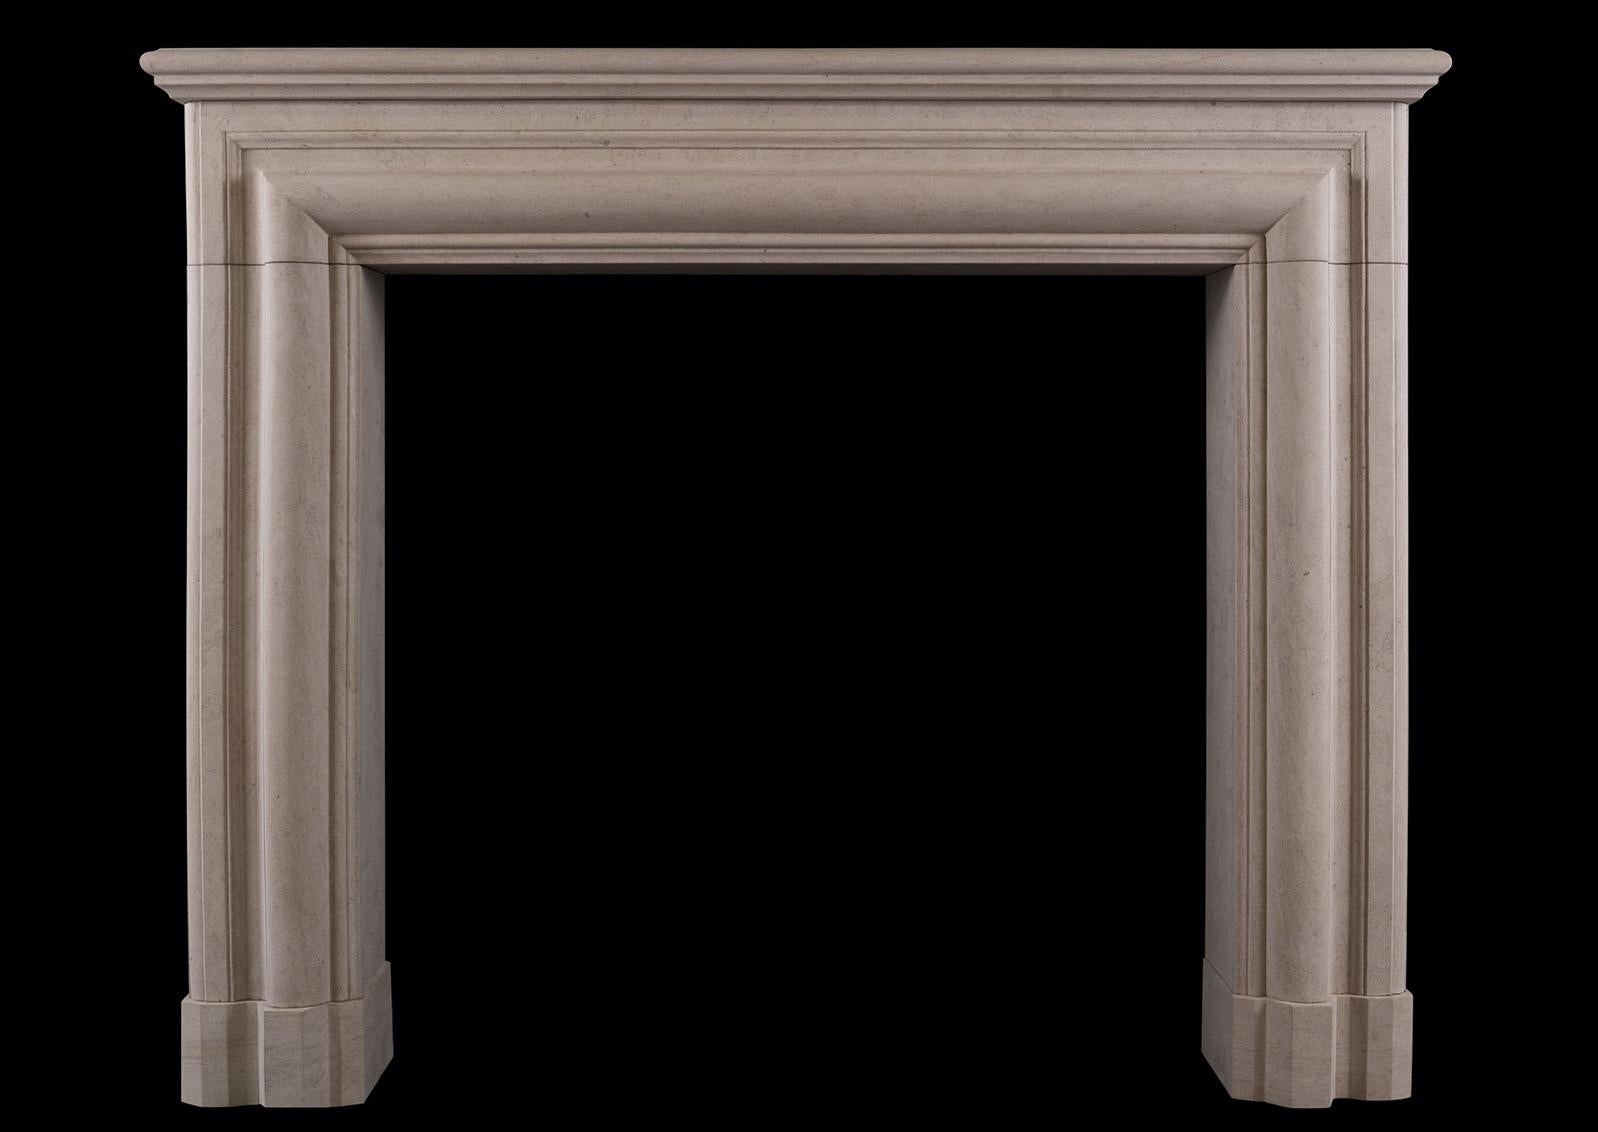 An English bolection fireplace in Ancaster stone. The jambs and frieze with moulding throughout, surmounted by moulded shelf. Unusually deep design for the style adding the benefit of a mantel. Modern. N.B. May be subject to an extended lead time,